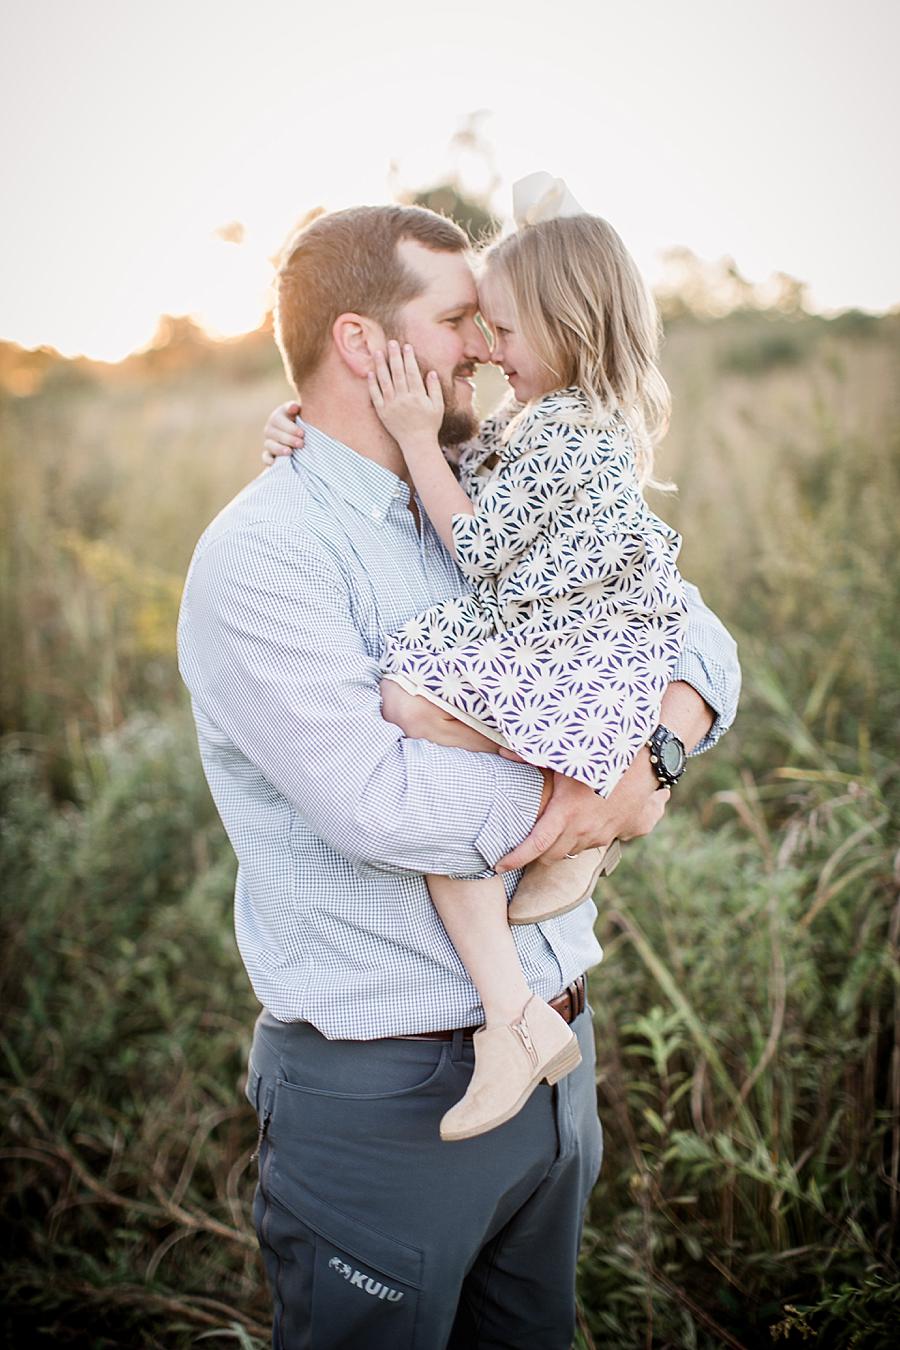 Golden hour at this Melton Hill Park Family Session by Knoxville Wedding Photographer, Amanda May Photos.